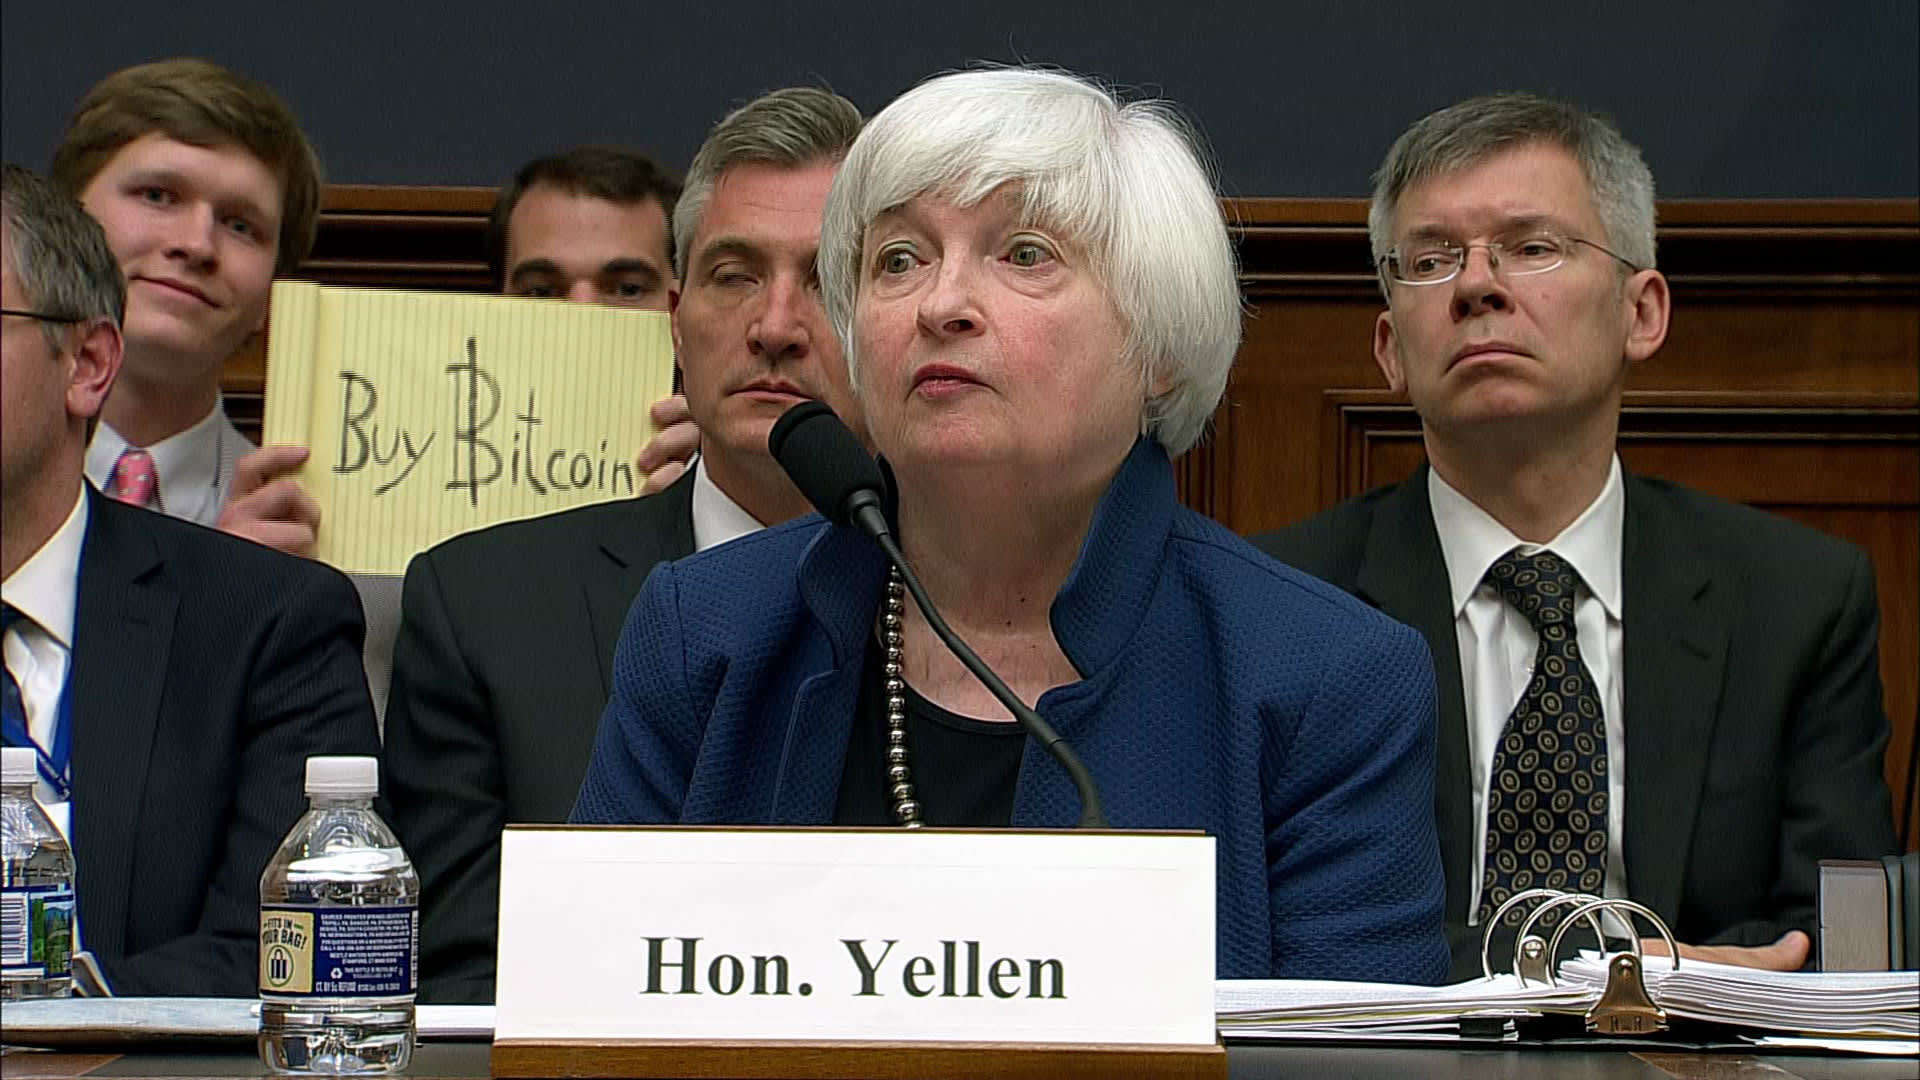 Someone holds up 'buy bitcoin' sign during Yellen testimony to Congress